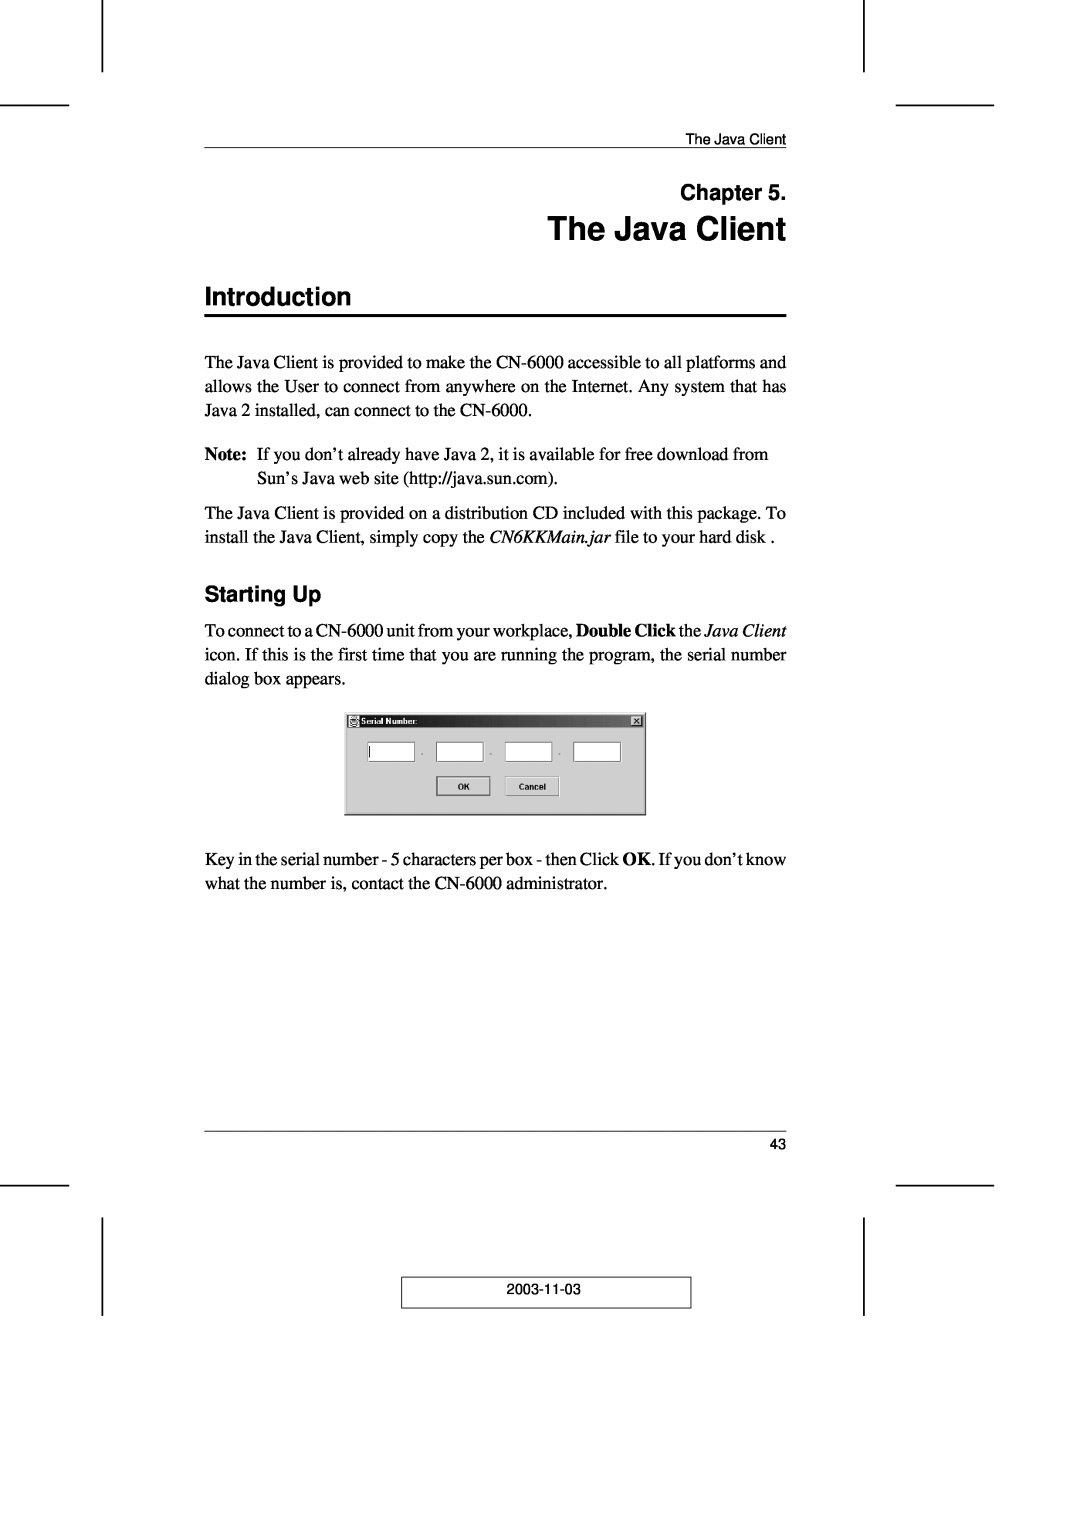 ATEN Technology CN-6000 user manual The Java Client, Introduction, Chapter, Starting Up, 2003-11-03 